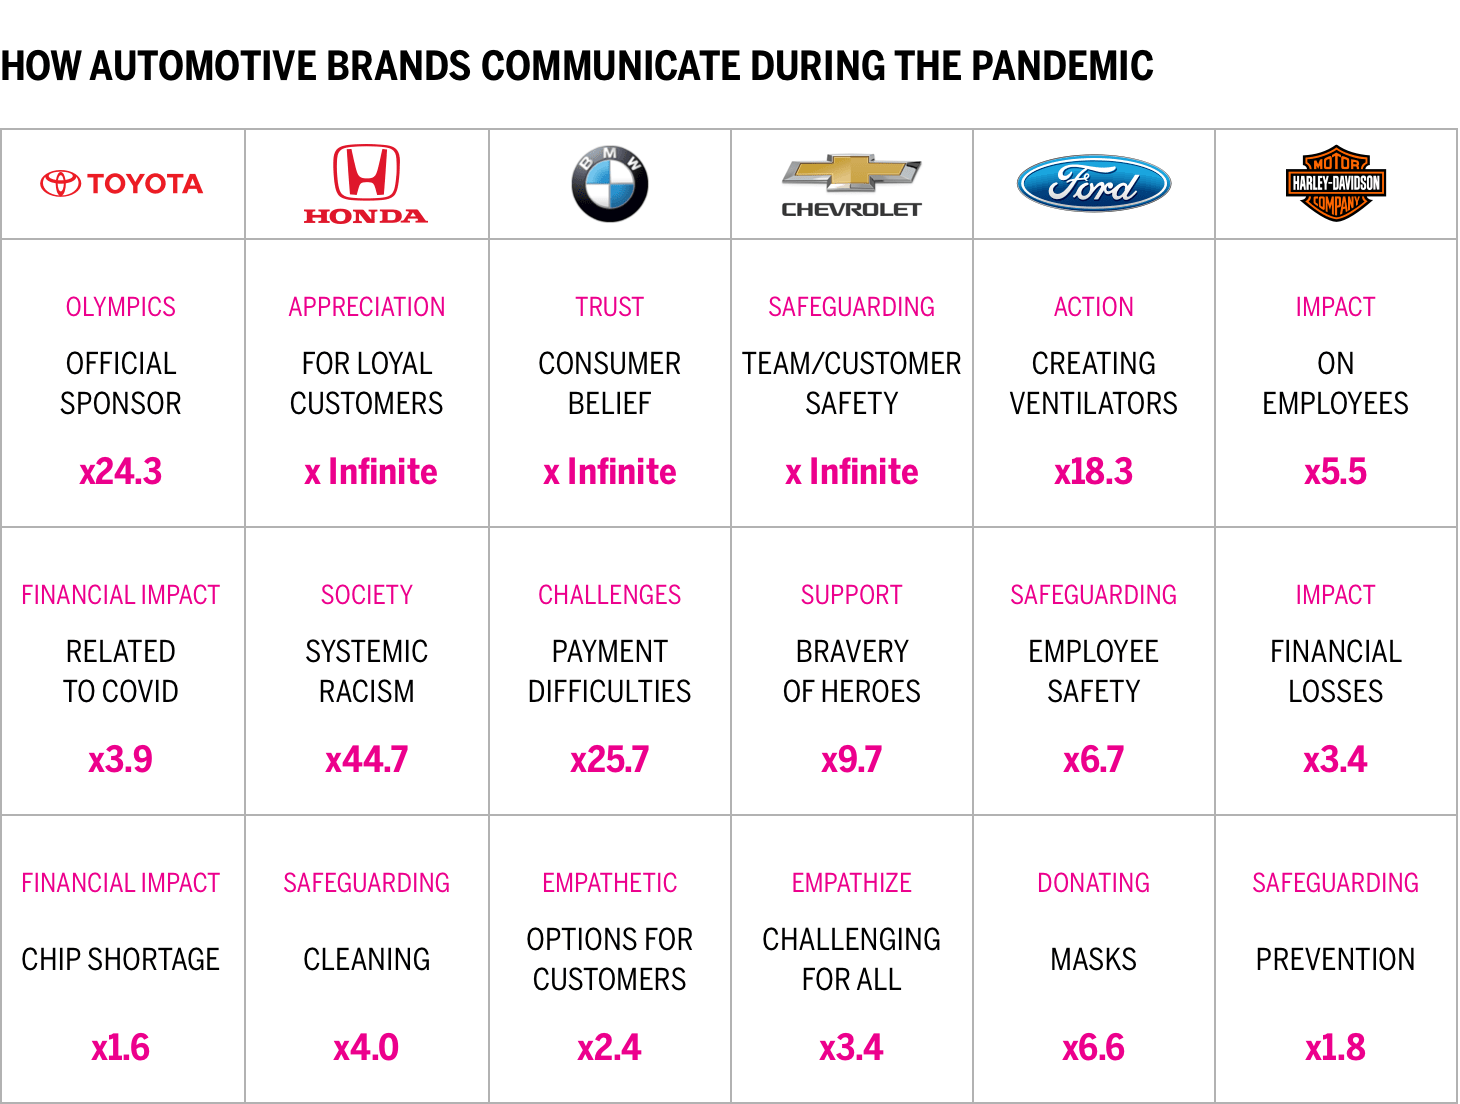 How Automotive Brands Communicate During the Pandemic Chart